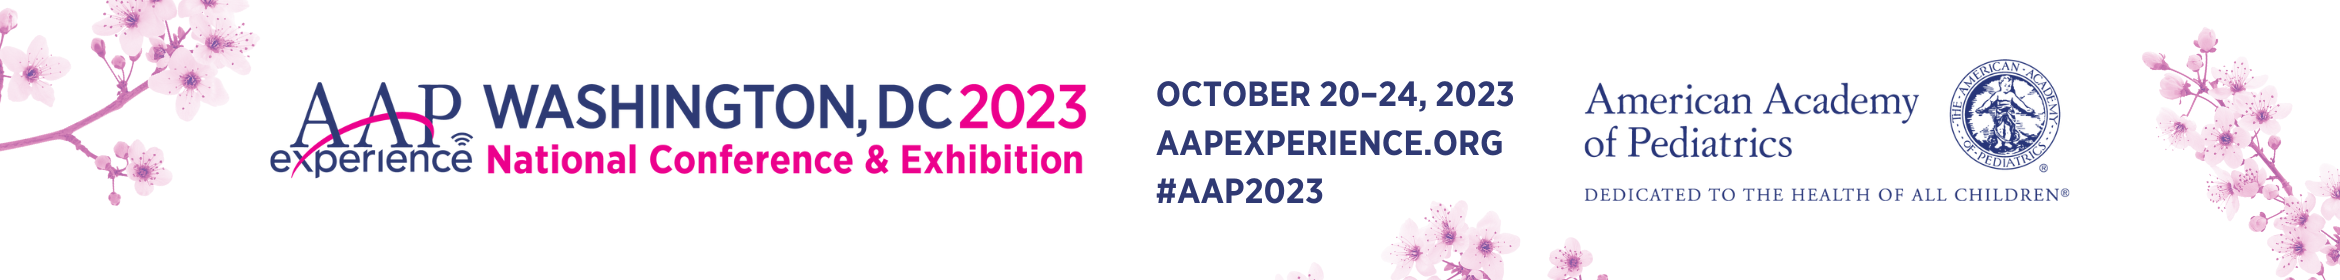 AAP Experience National Conference & Exhibition 2023